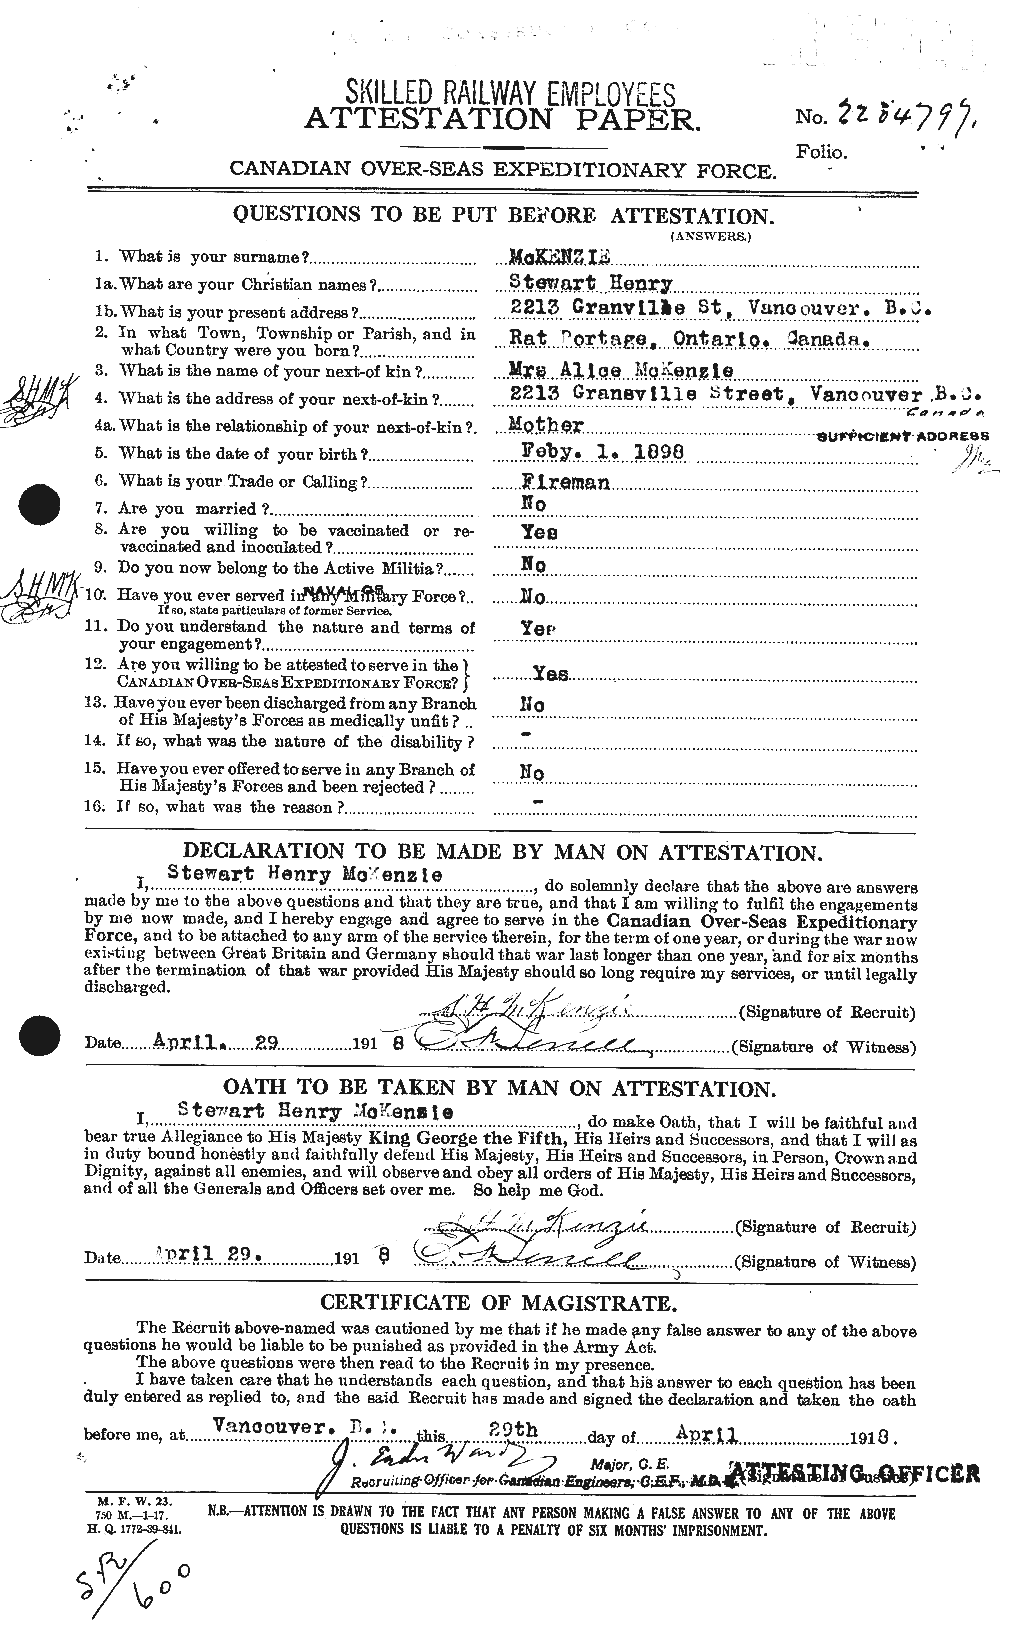 Personnel Records of the First World War - CEF 530001a